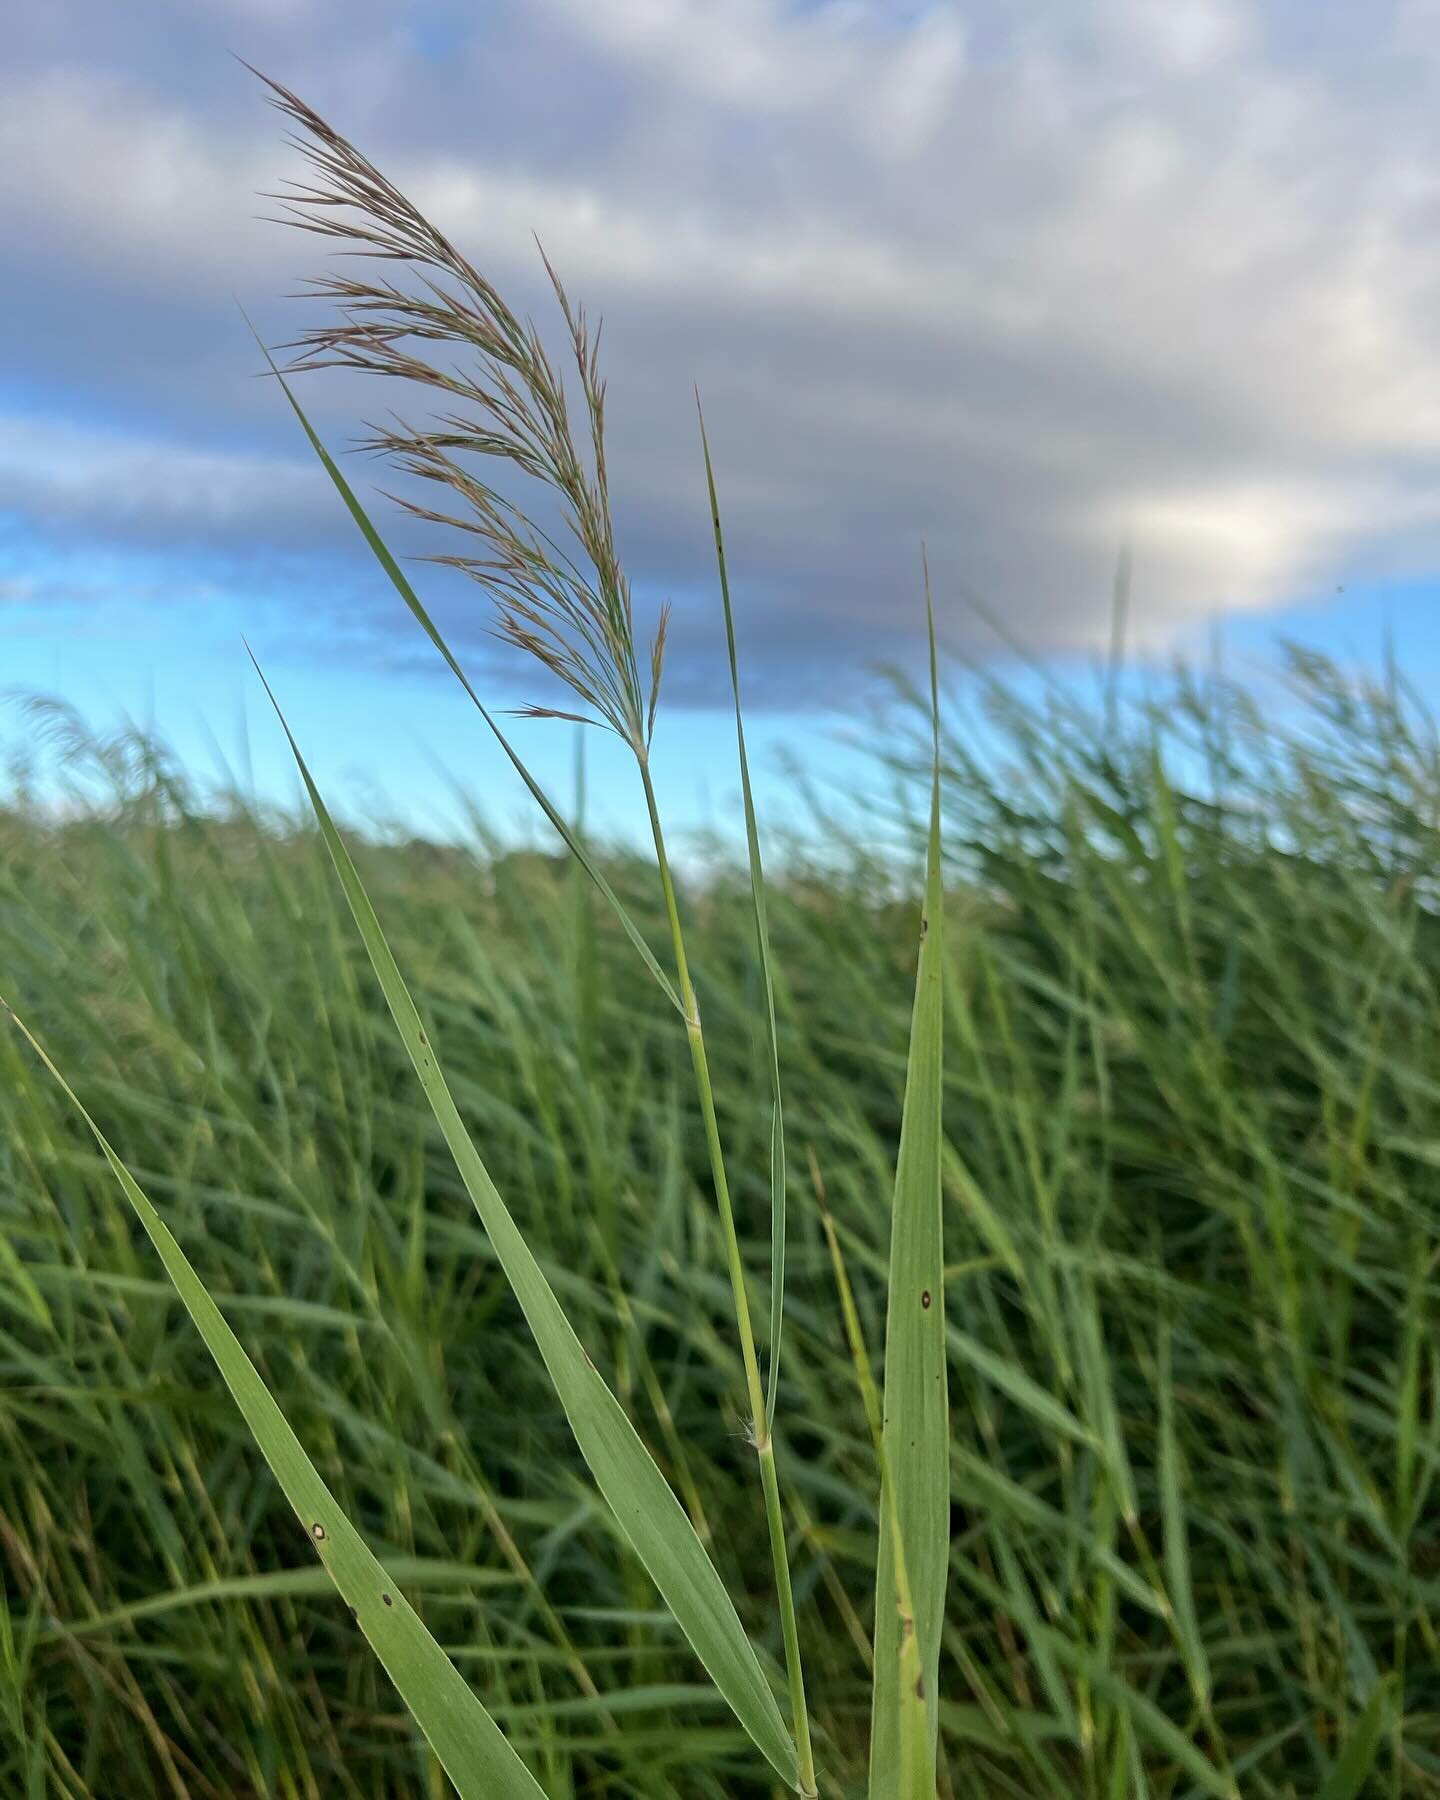 As autumn sets in, the common reed (Phragmities australis, dyiriil in the local Wiradjuri language) is starting to flower along the creek. A few months back, in this particular reed bed, reed warblers were darting and calling. I&rsquo;m hoping that w